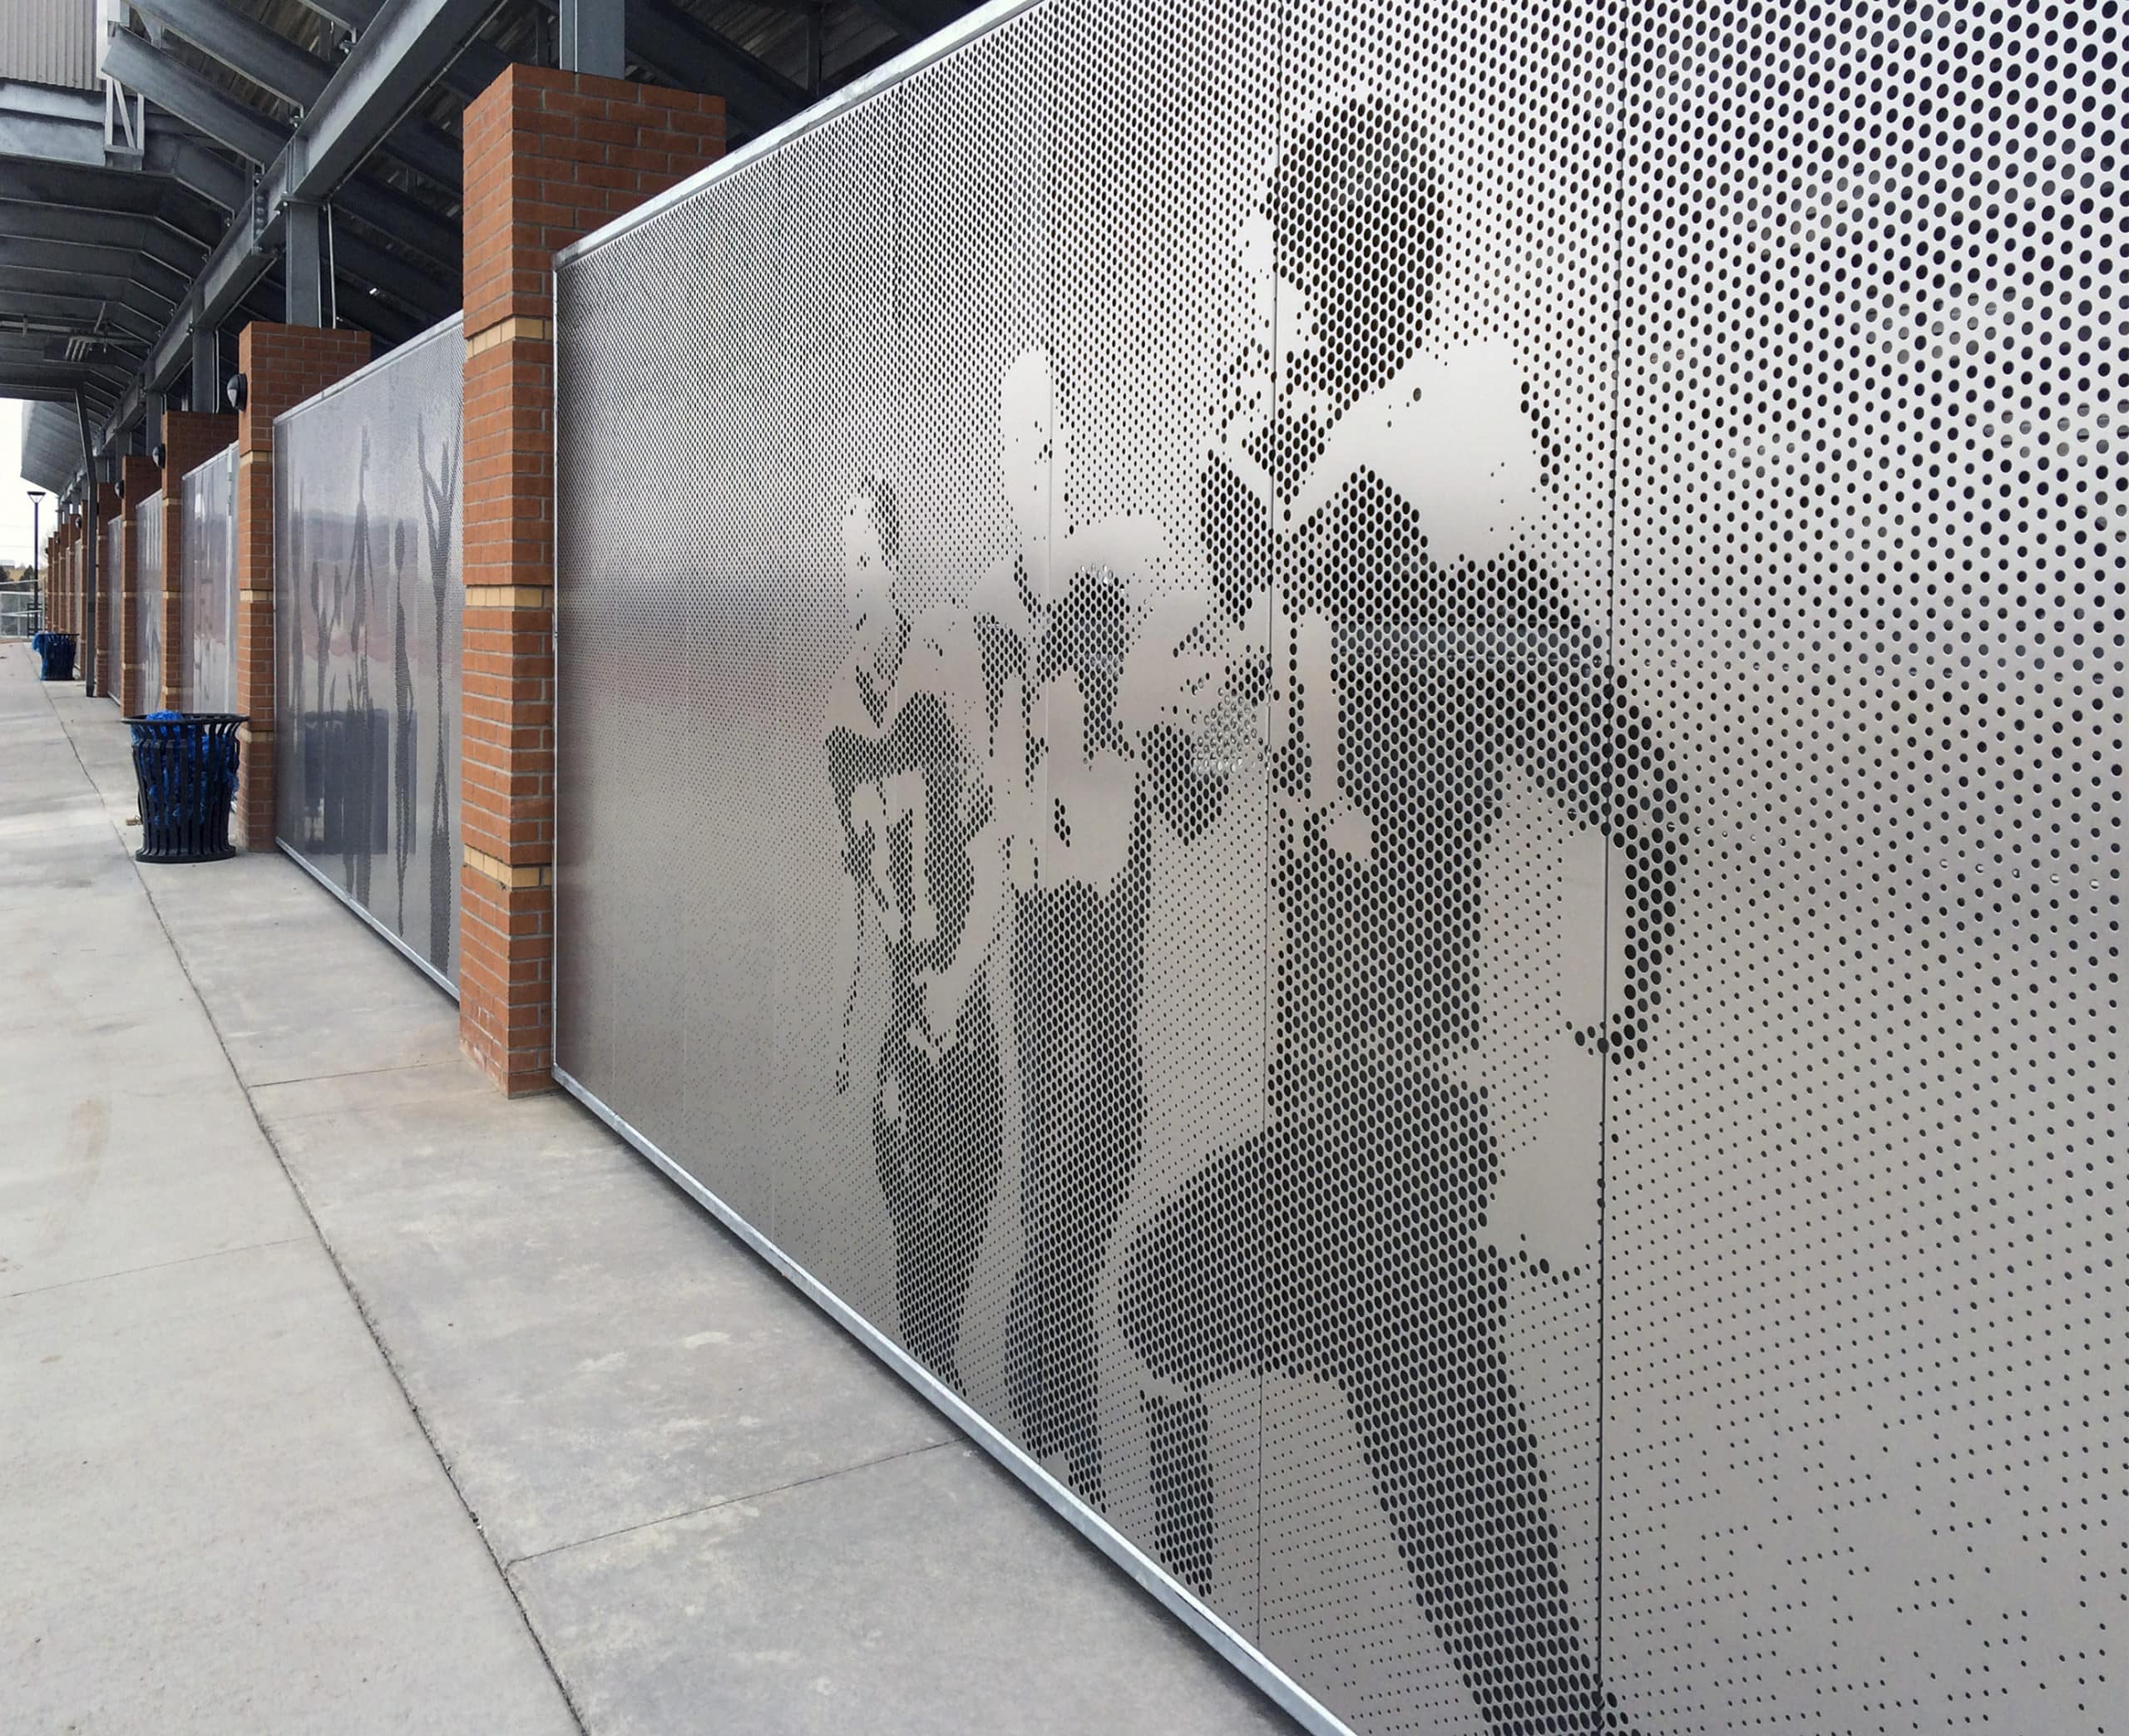 Custom screen walls emphasize a sports theme for Okie Blanchard Sports Complex while also functioning as passive security measures that prevent access under the bleachers.